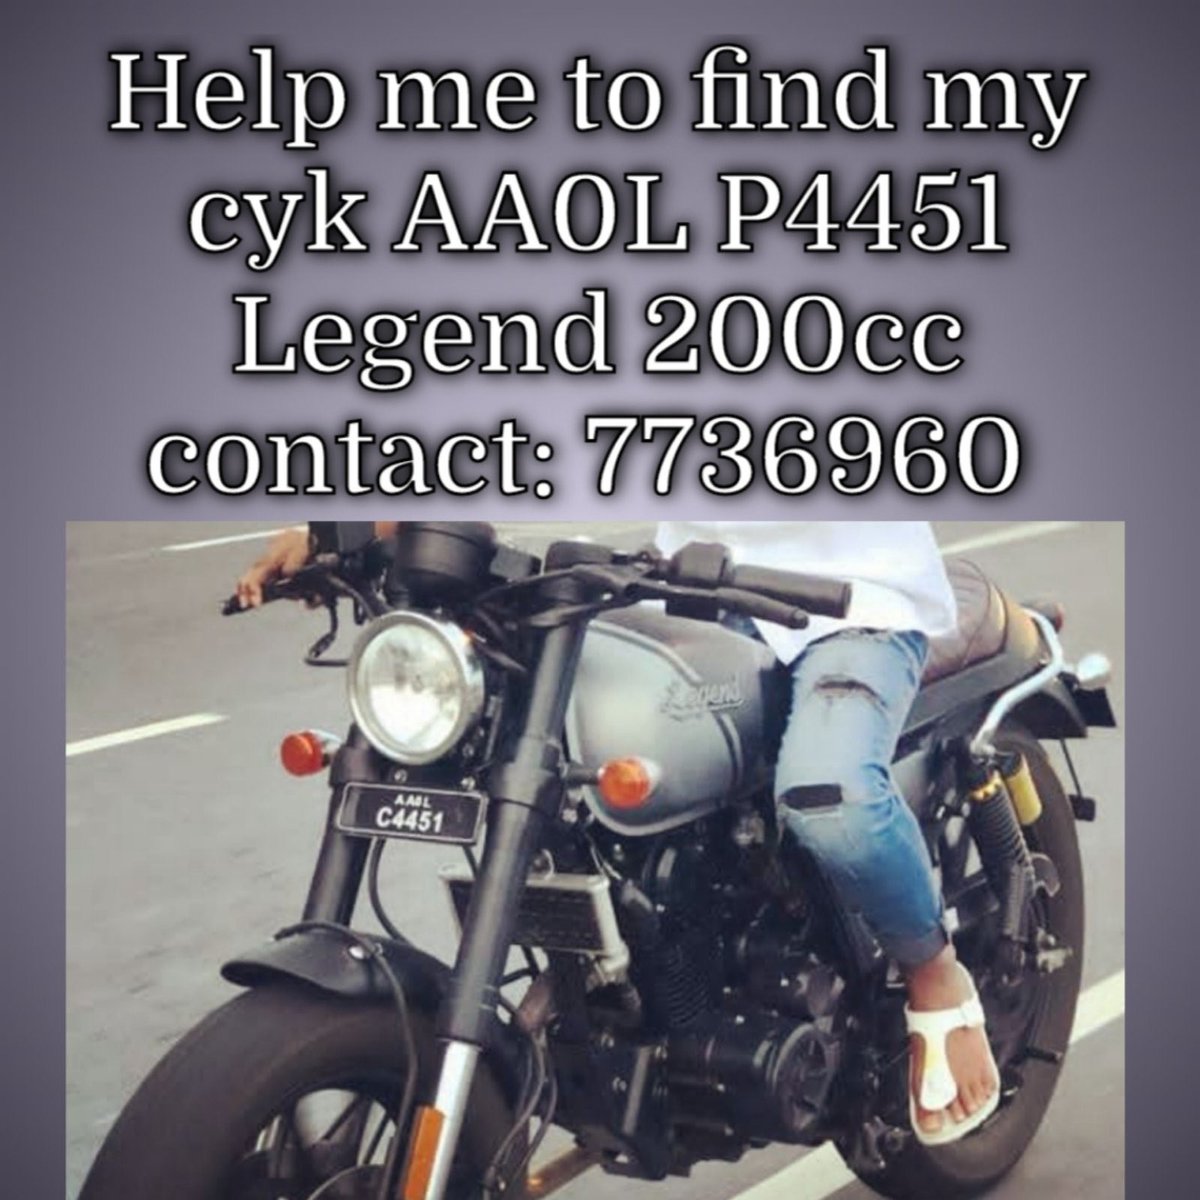 Help me to find my brother @AhmedBenbe cyk. AA0L P4451. Contact 7736960 @mvlostfound